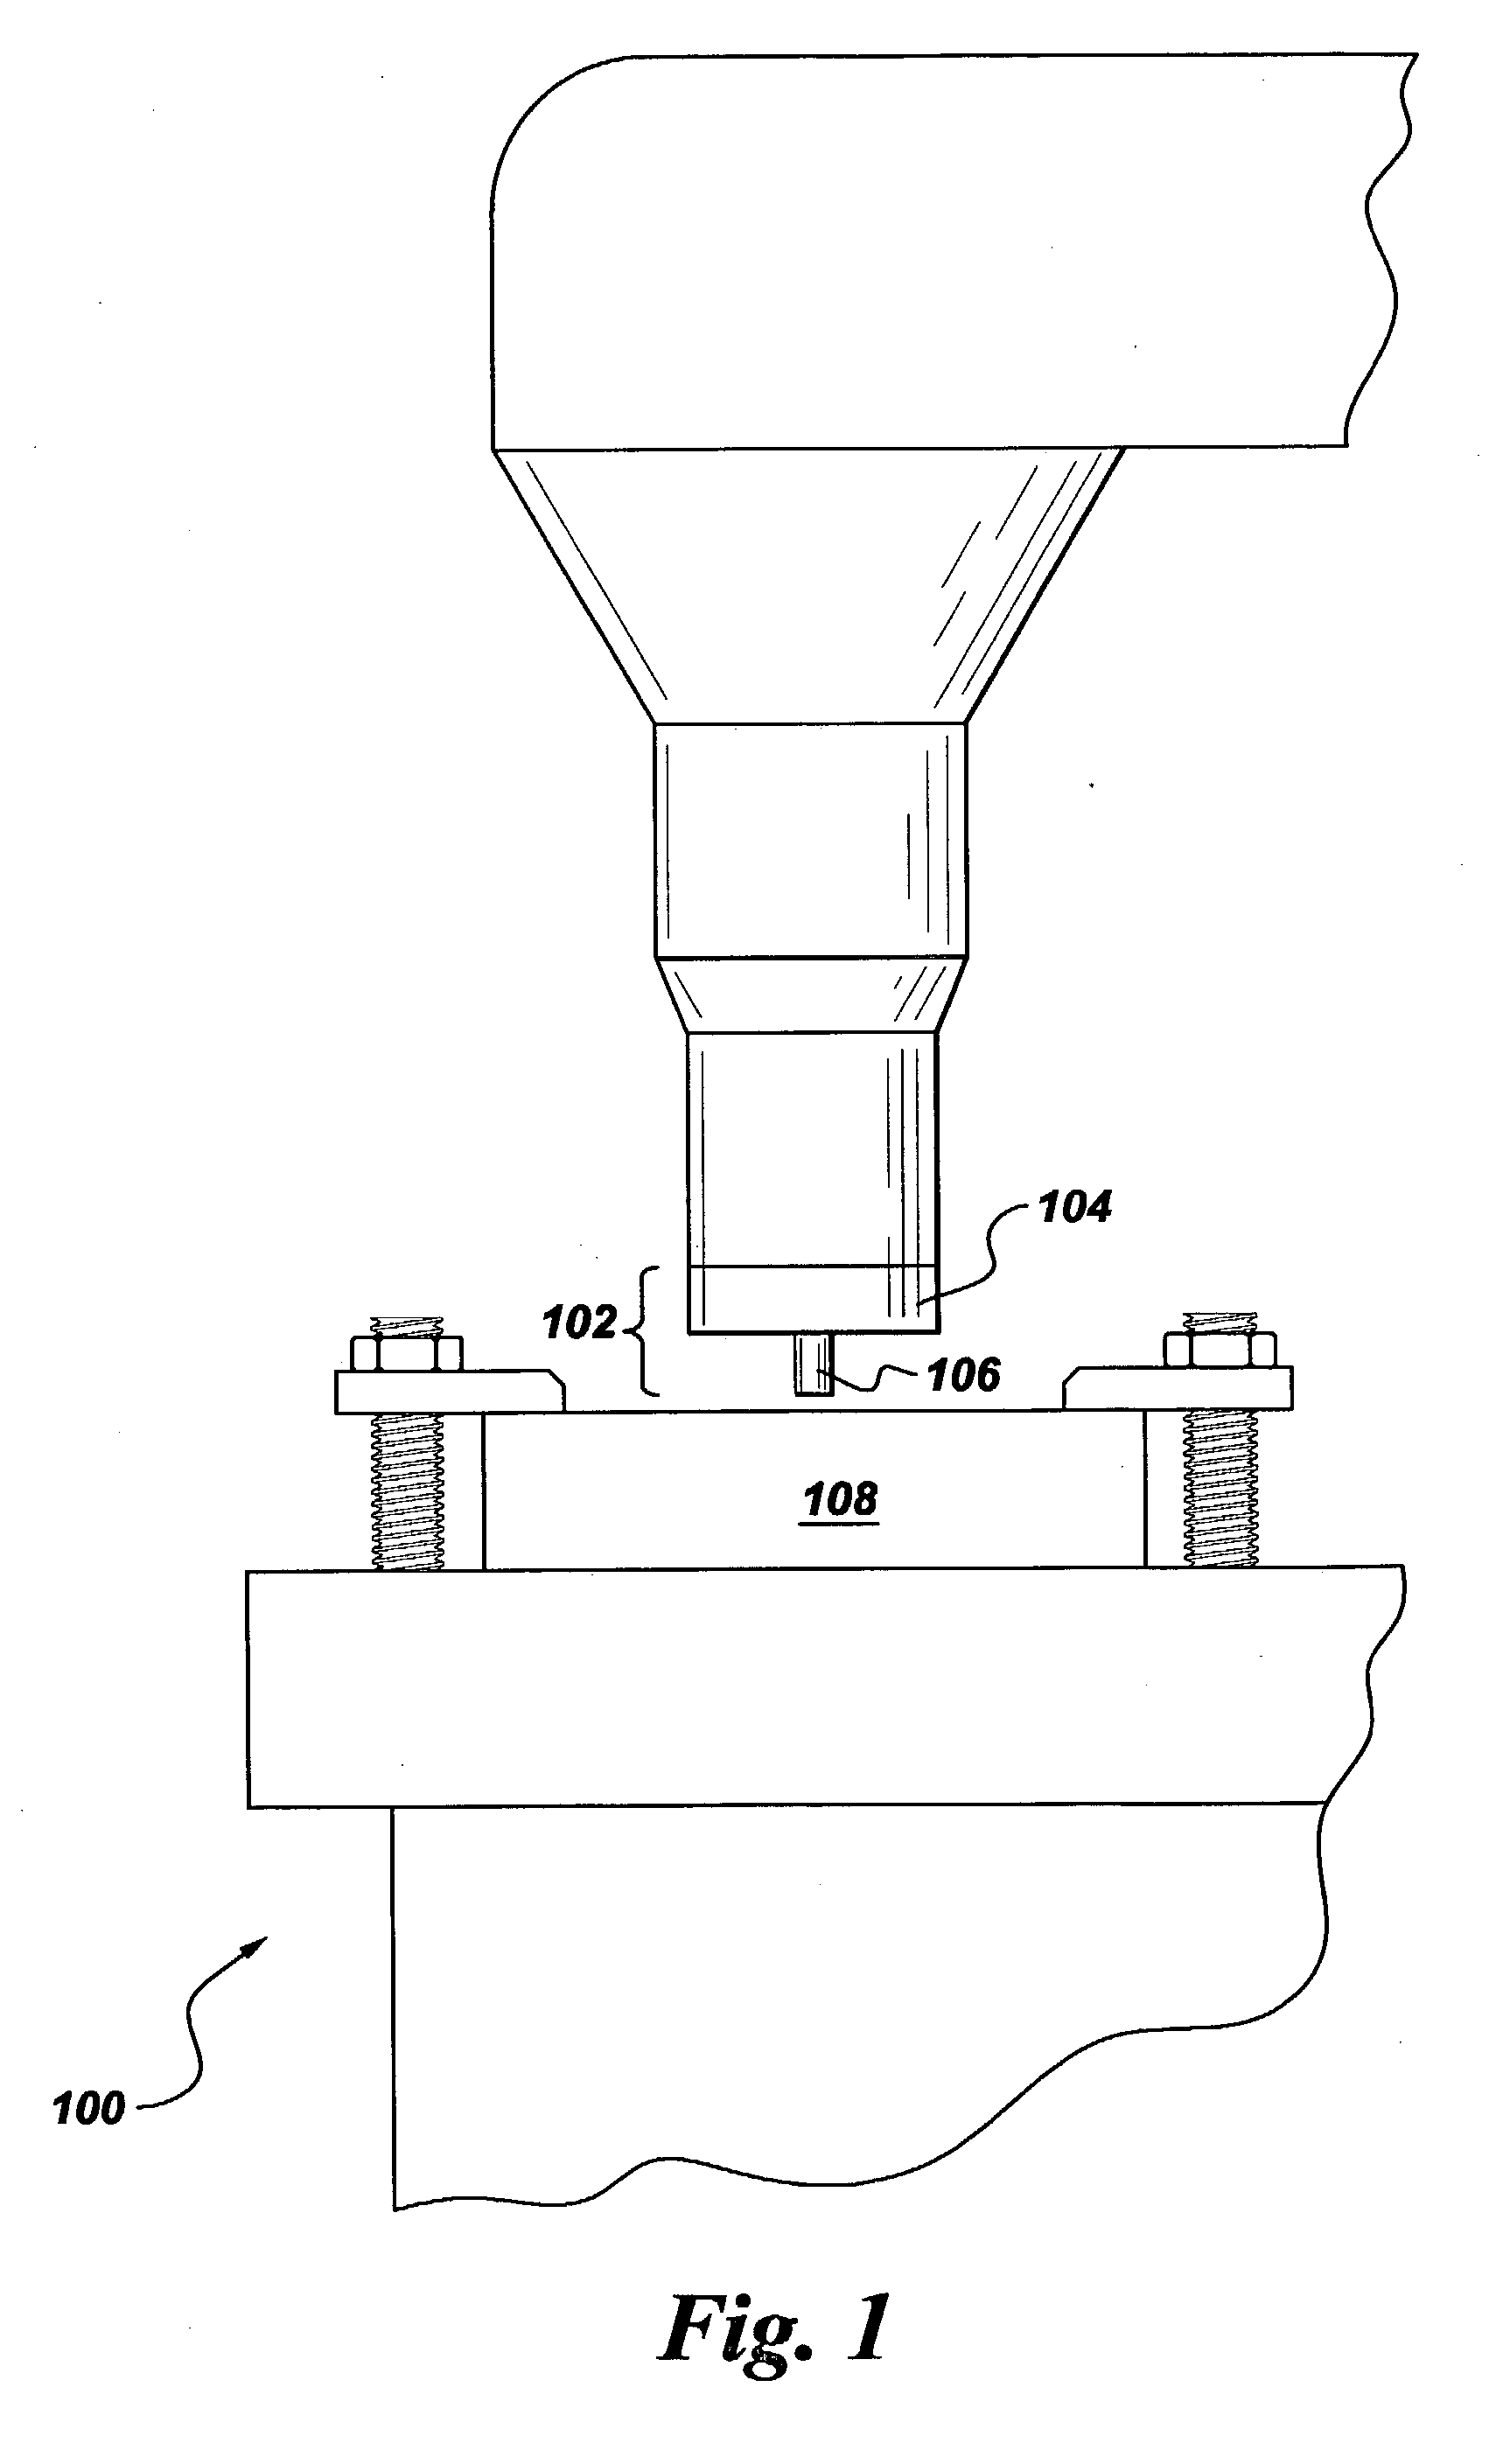 Apparatus and method for friction stir welding of high strength materials, and articles made therefrom